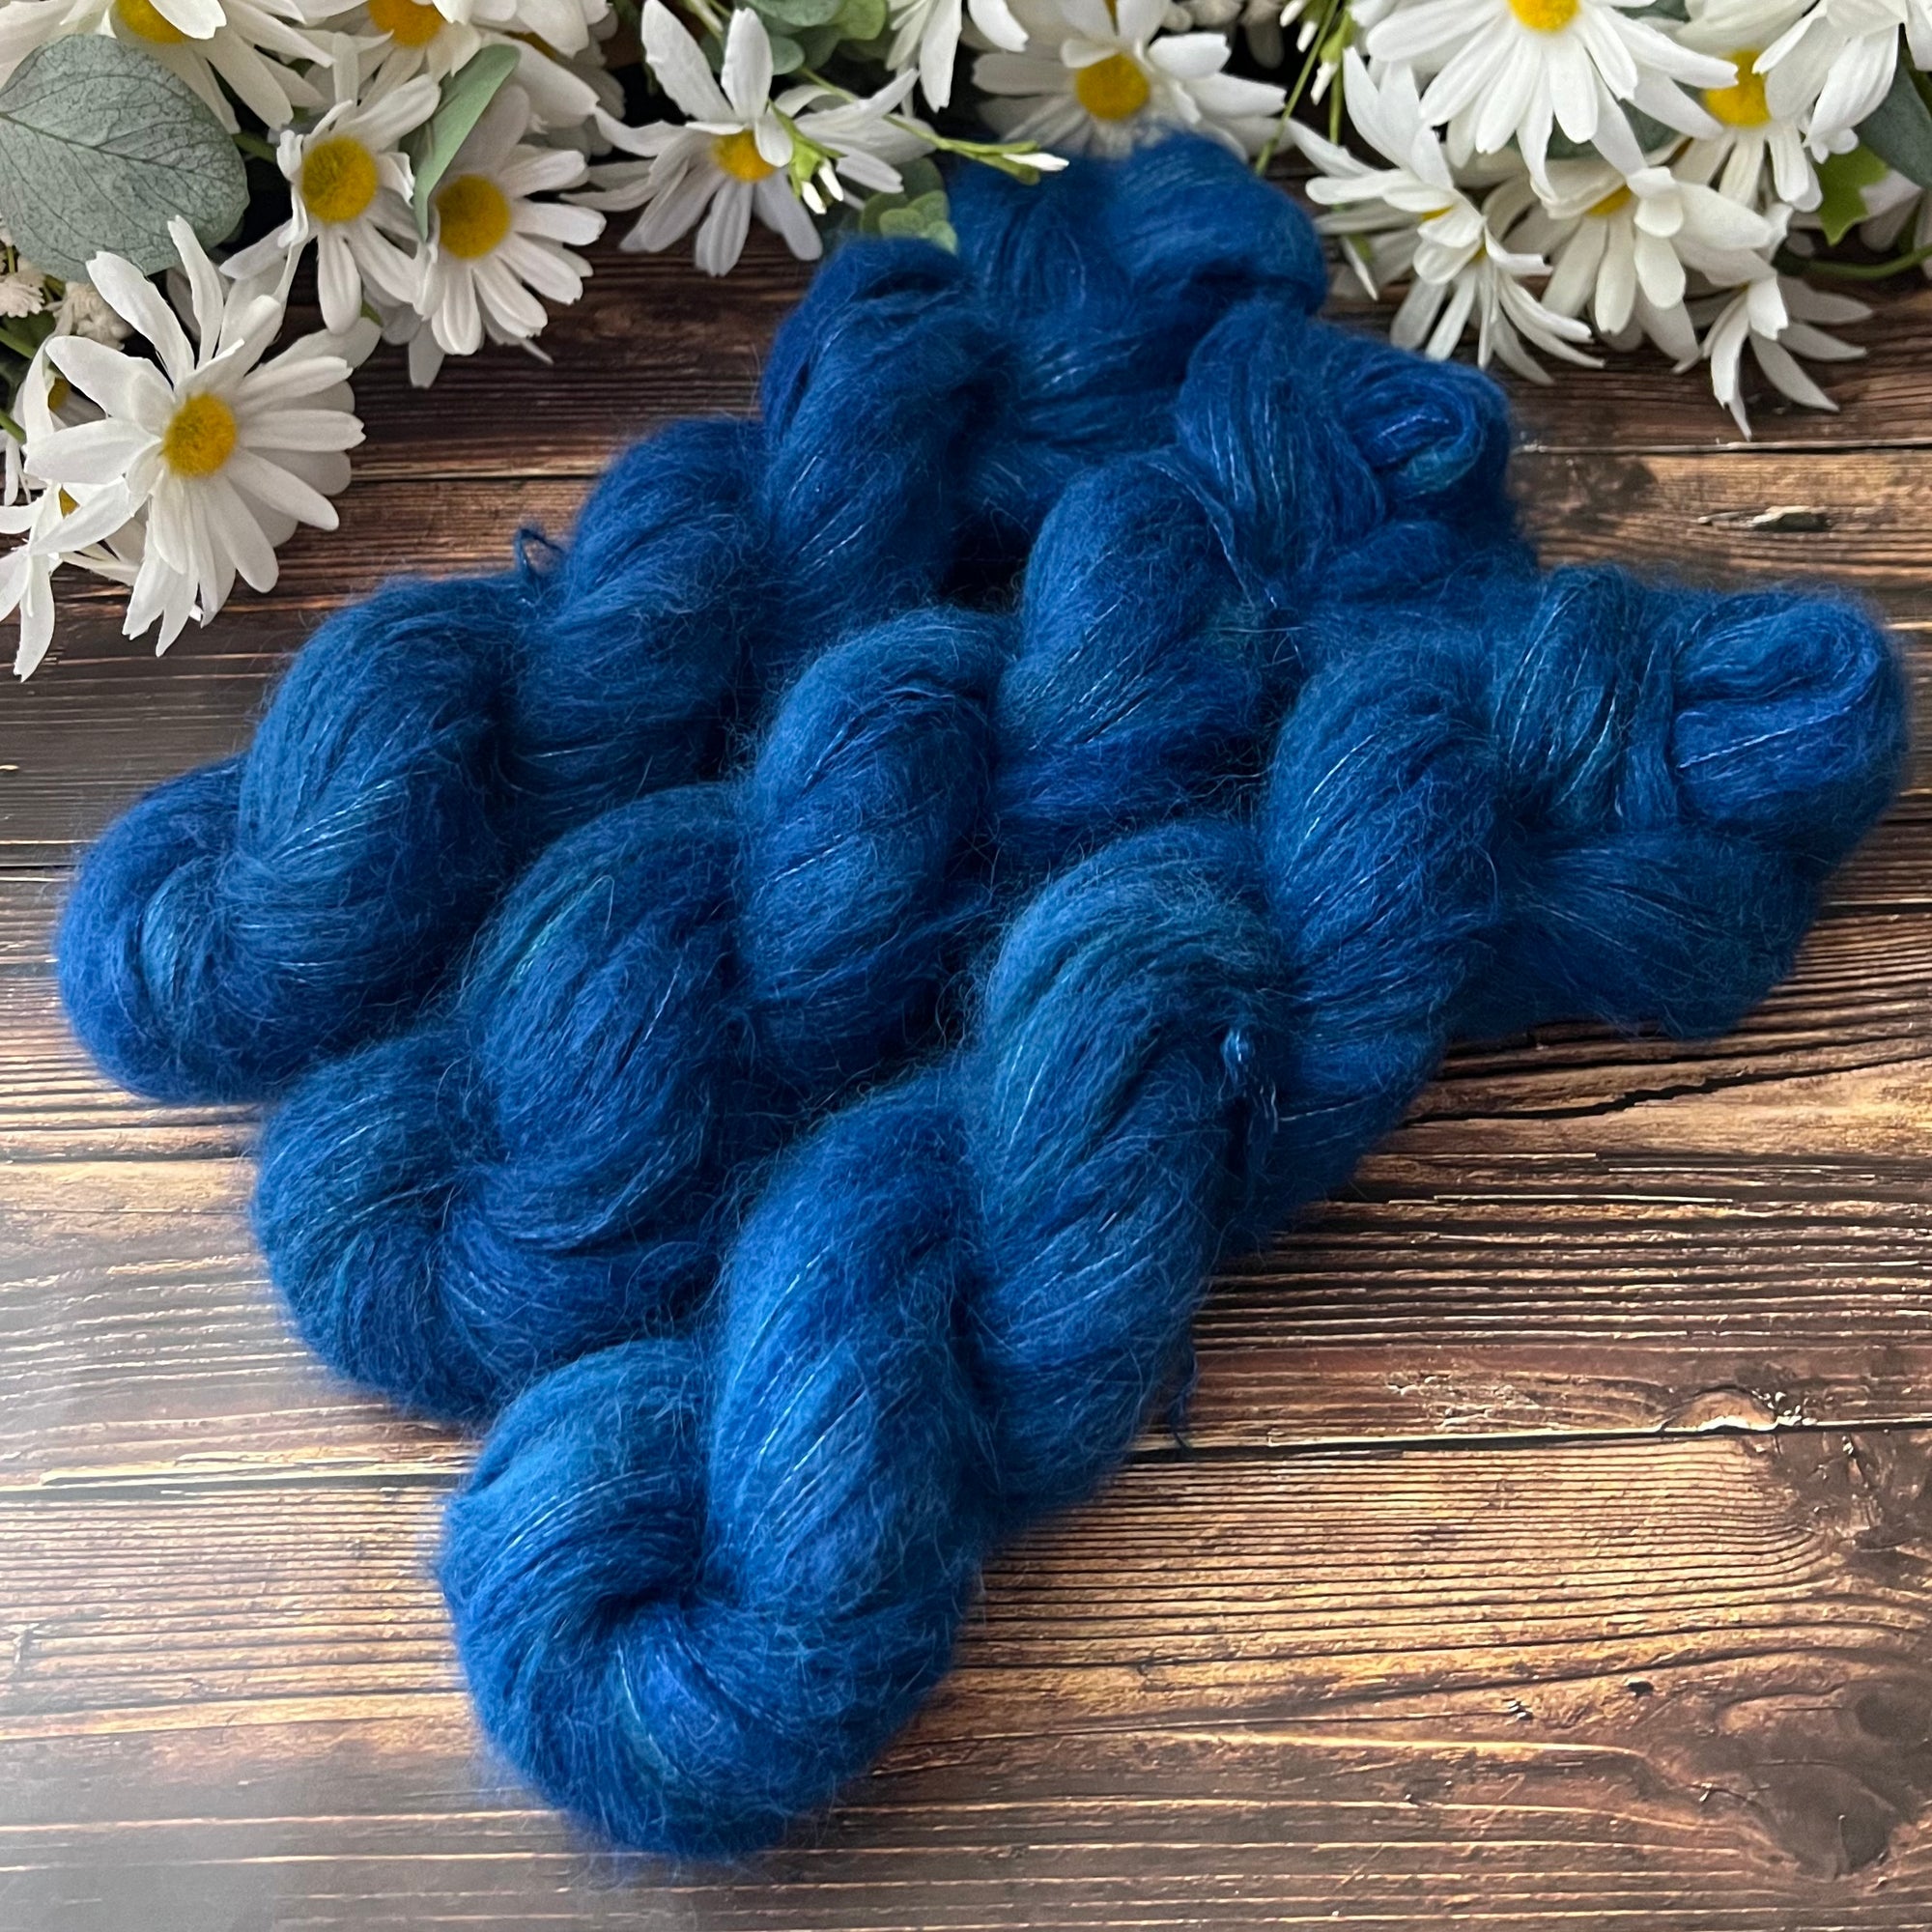 "City Vibes" Hand-dyed Yarn